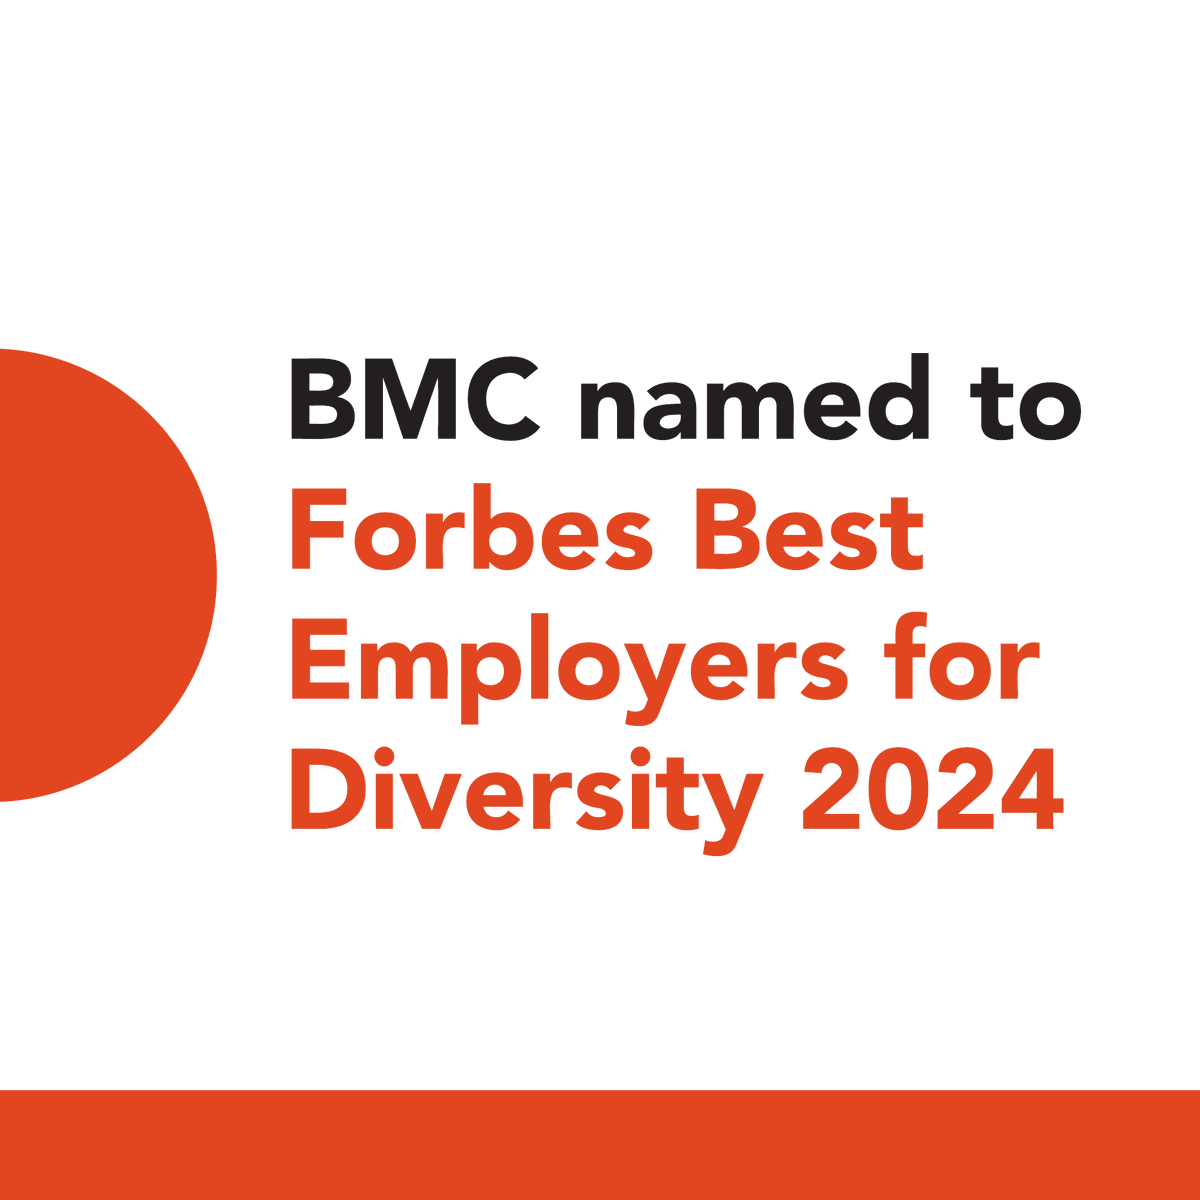 We're #BMCProud to be named to @Forbes Best Employers for Diversity 2024! BMC's commitment to DEI is the thread that connects our community and is woven into our approach to patient care, employee wellbeing, and community partnerships. Get the full list: bit.ly/4aKLB33